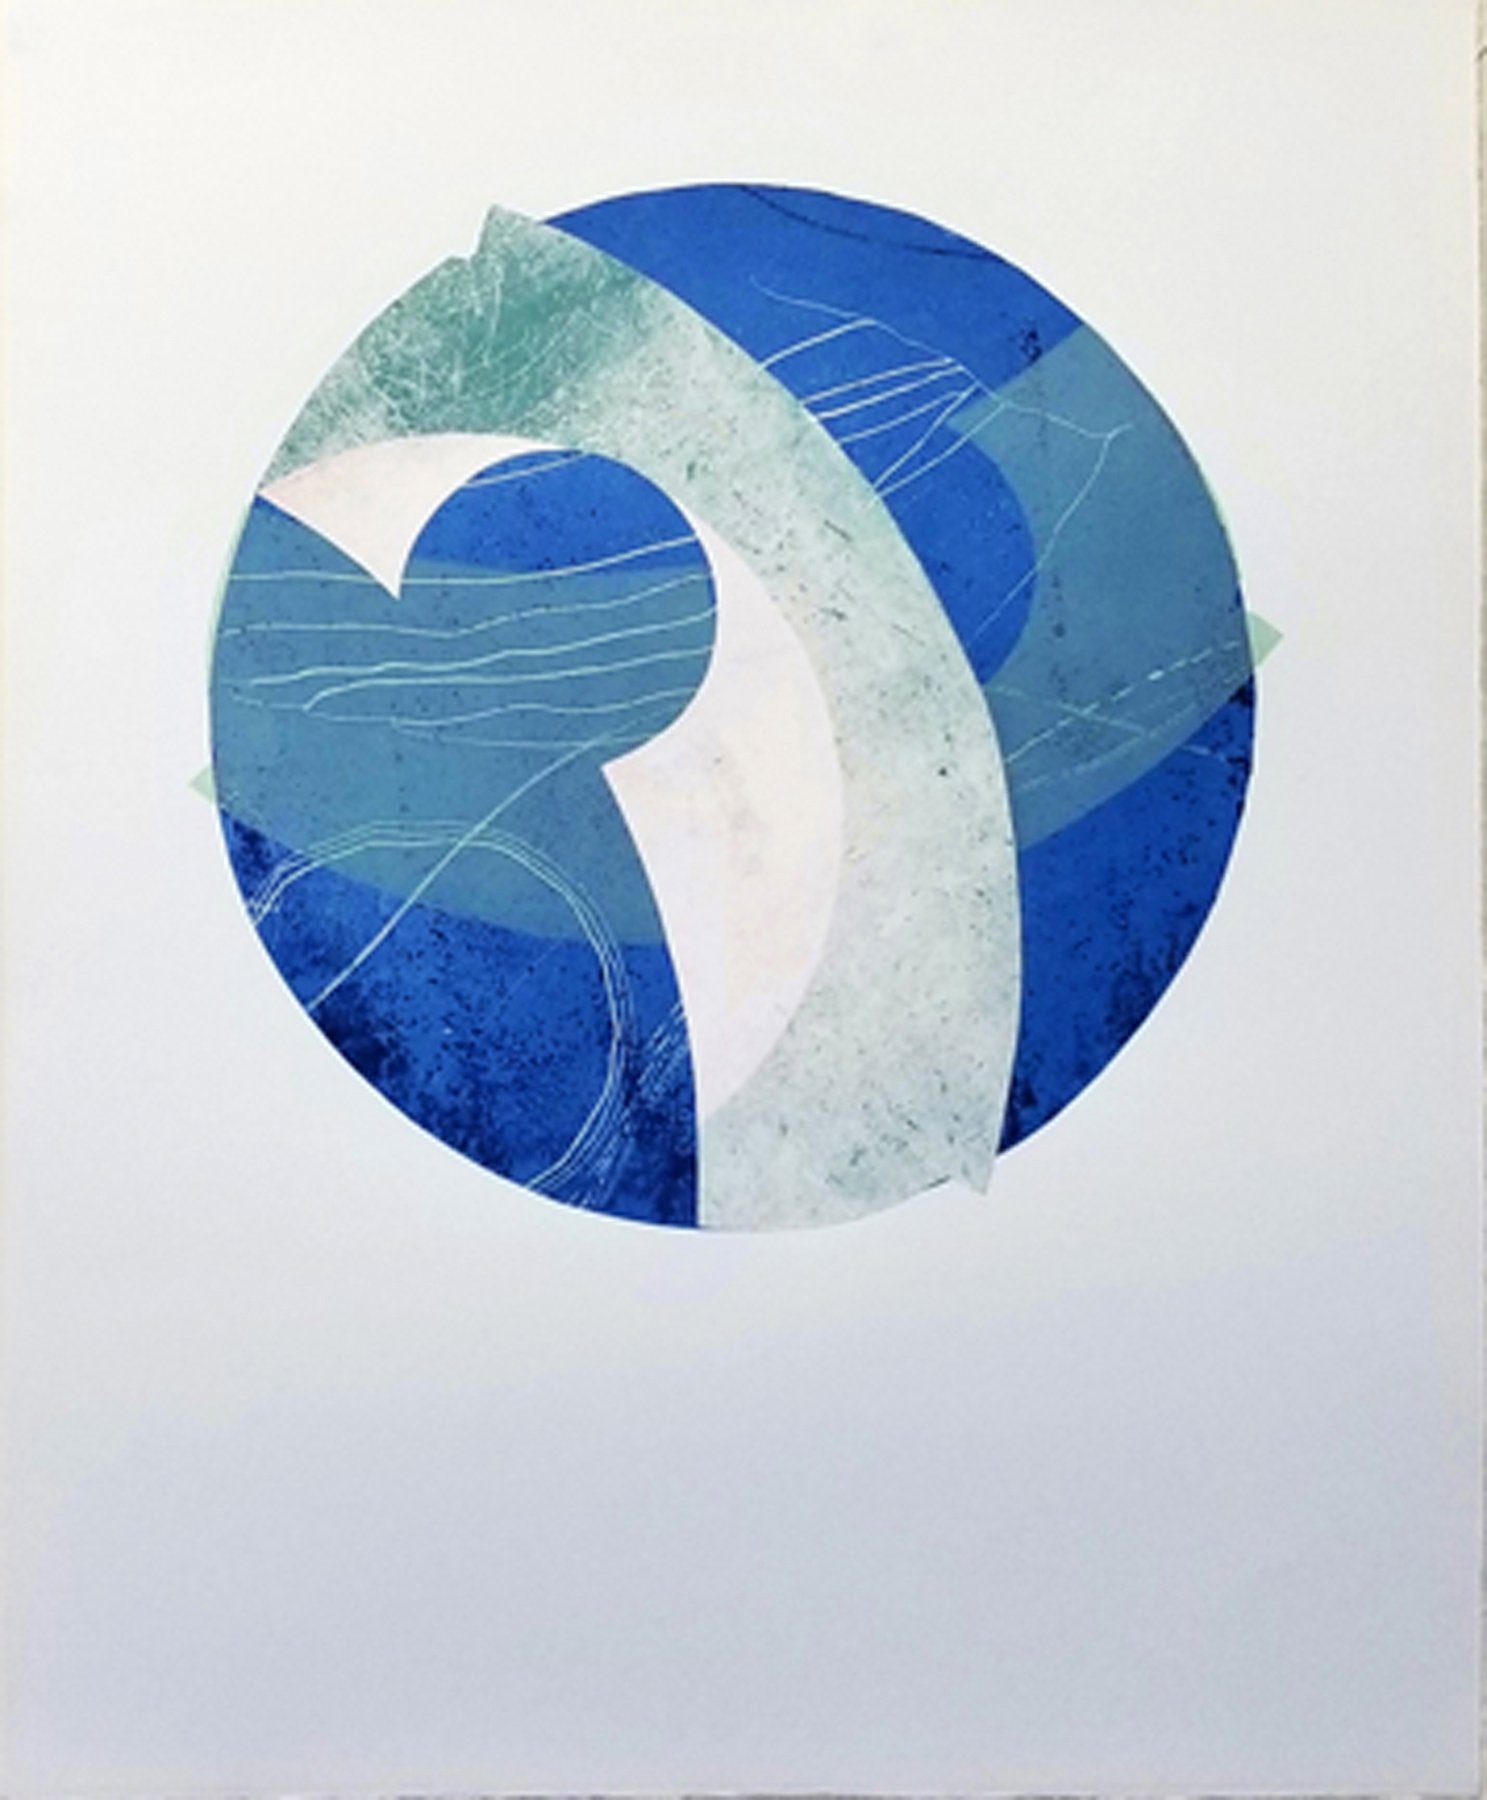  Elisa Lanzi  Shelter in Place, no. 8  Hand-pulled monotype, relief, collage on blue Magnani Pescia paper, Akua ink, 21x16 3/4 